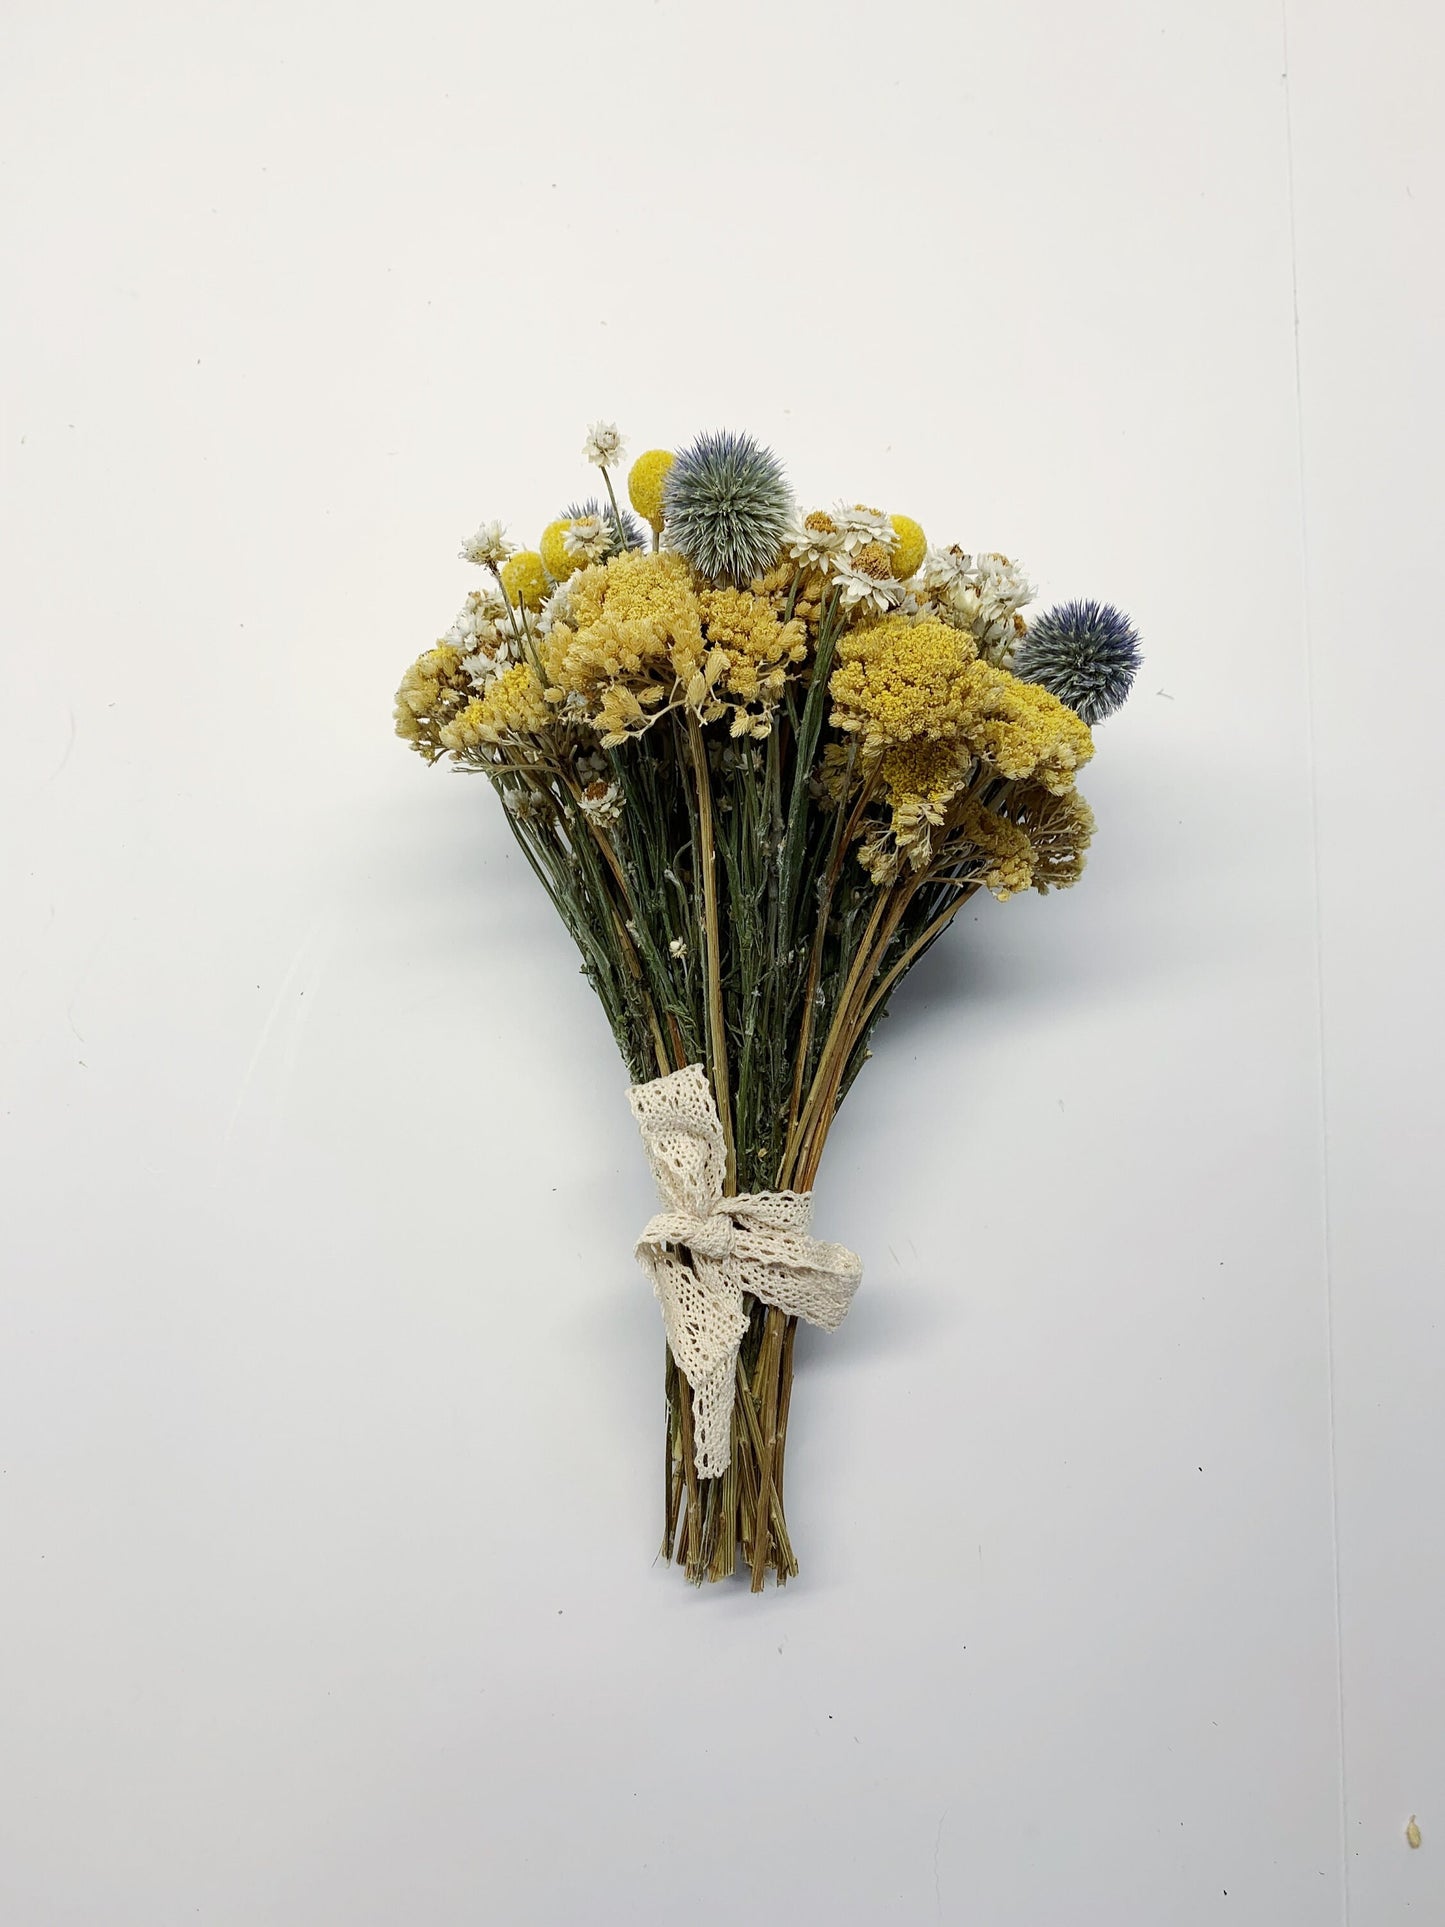 Summer Collection, Bouquet, Dried Flowers, Preserved, Bridal, Wedding, Floral, Colorful, Bridesmaid, Yellow yarrow, blue, globe thisle